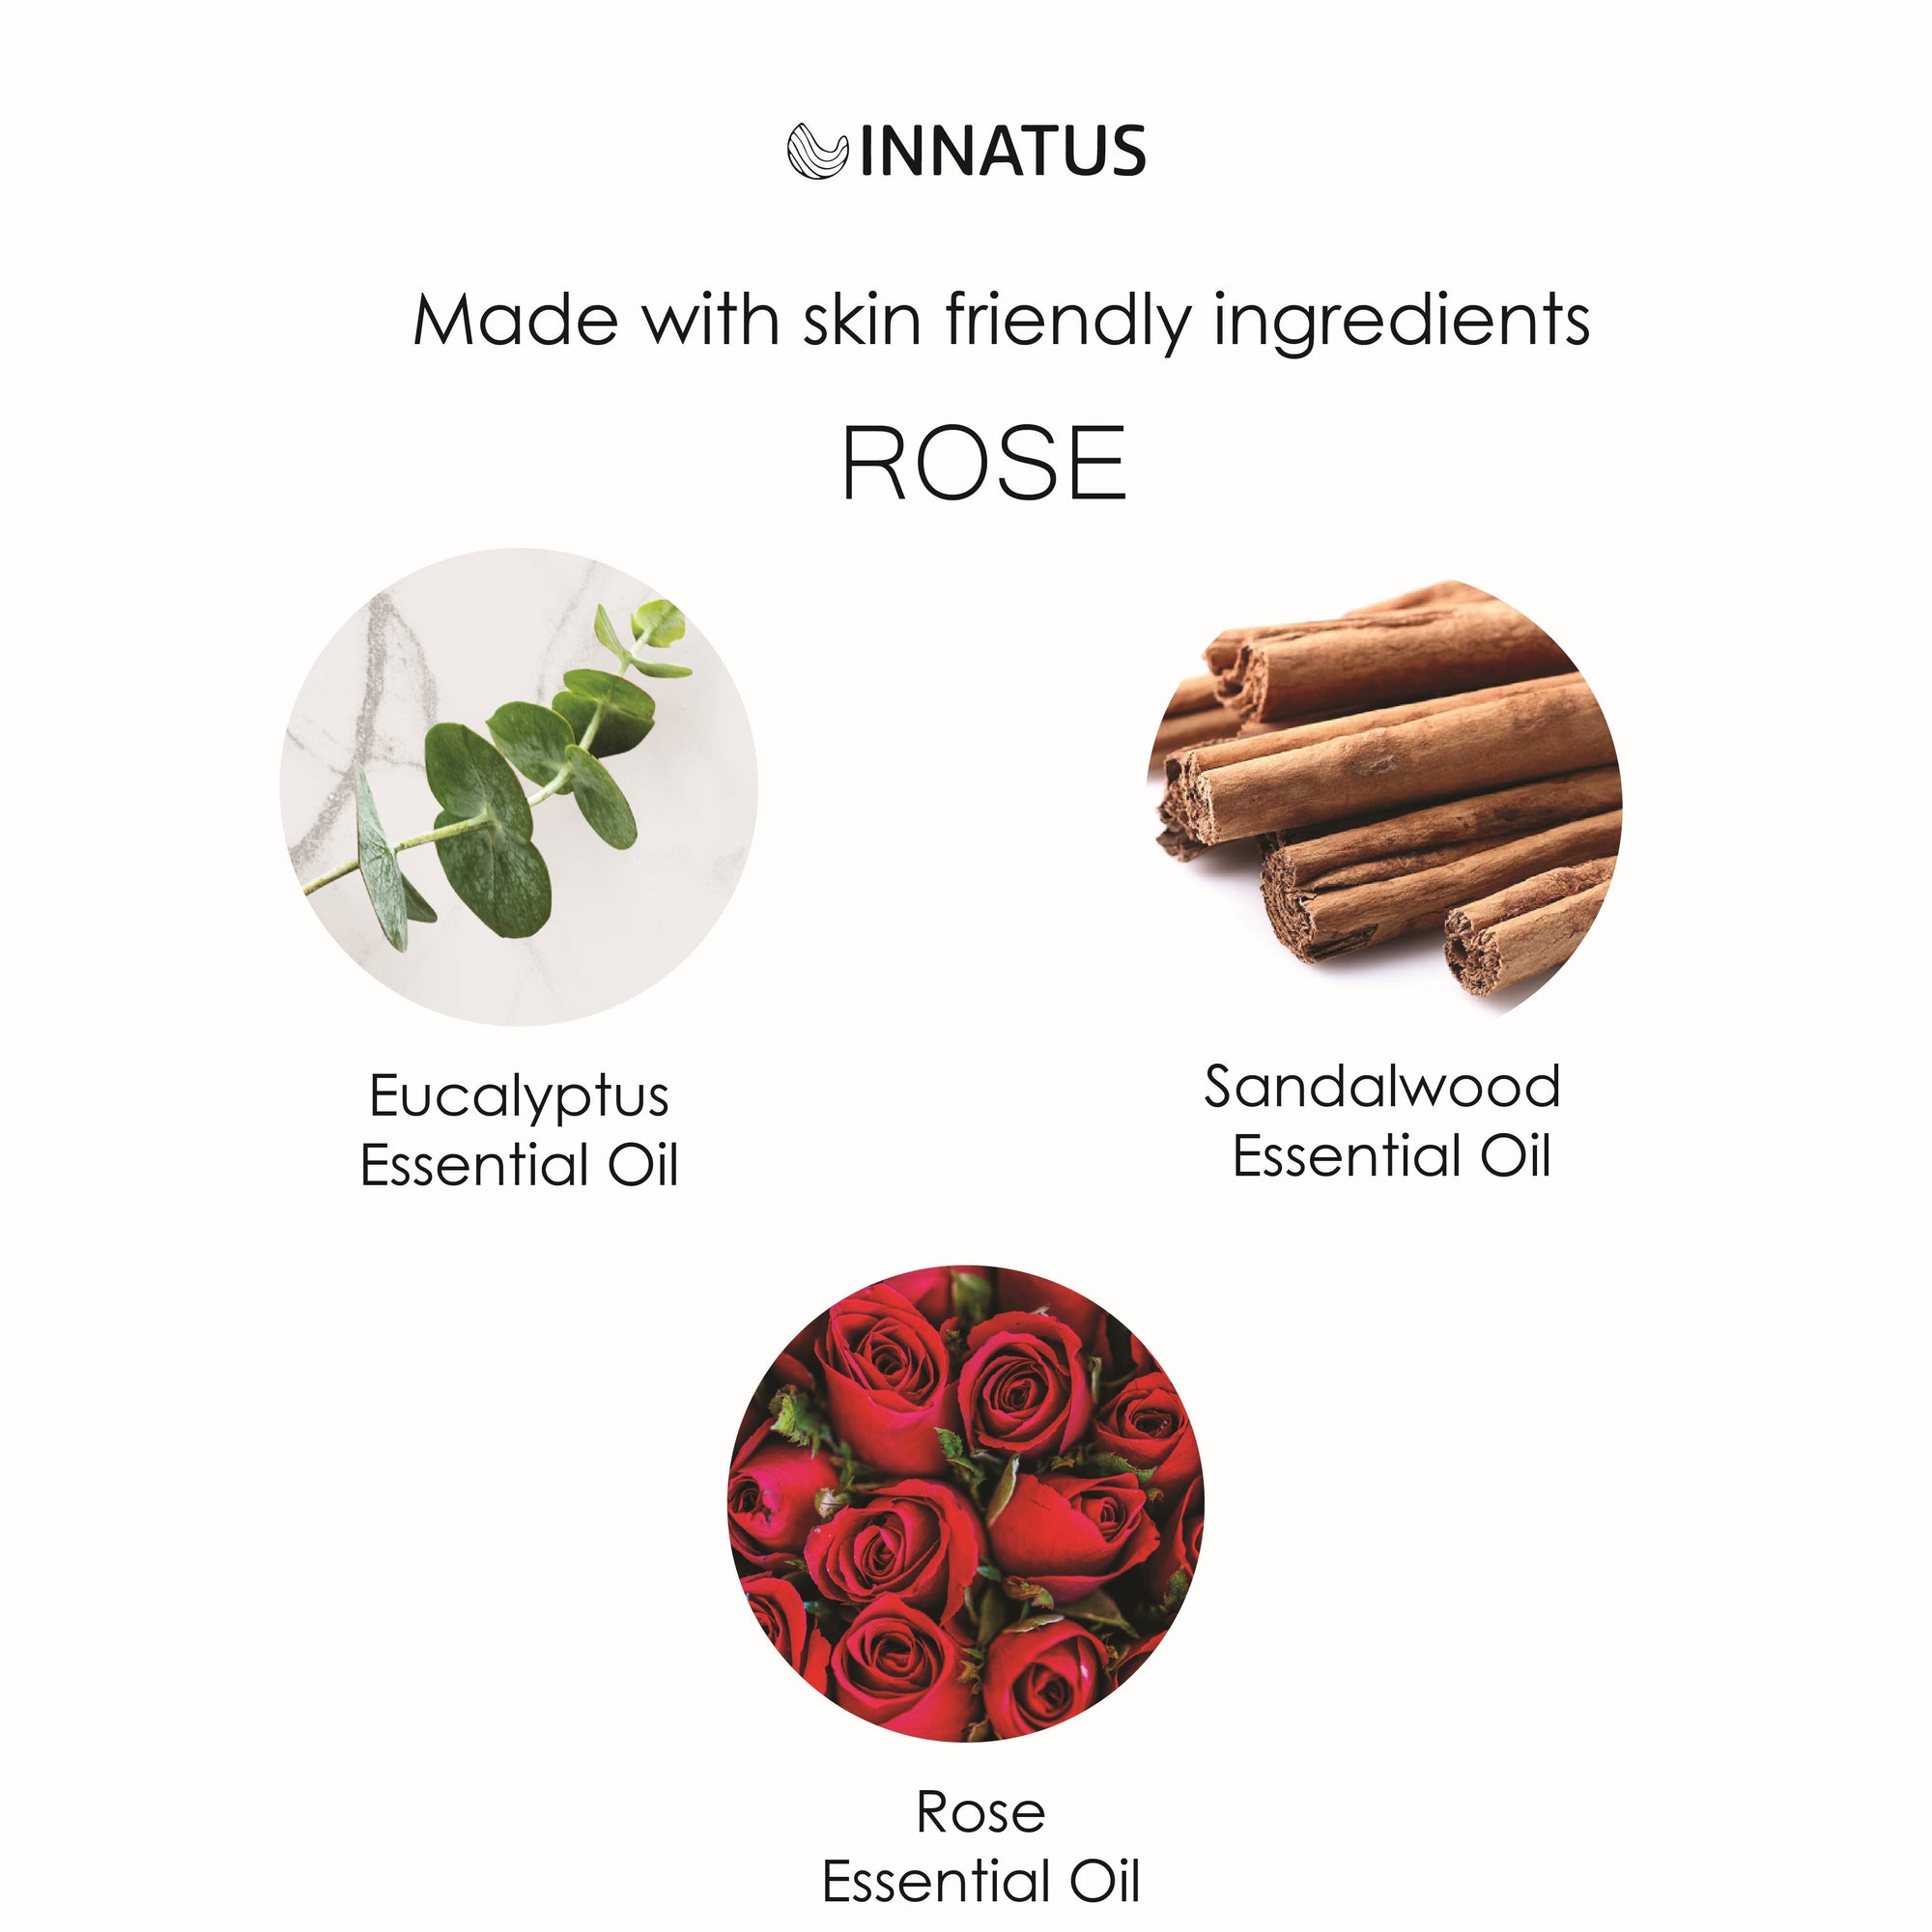 Shower spray eucalyptus oil with a whiff of rose